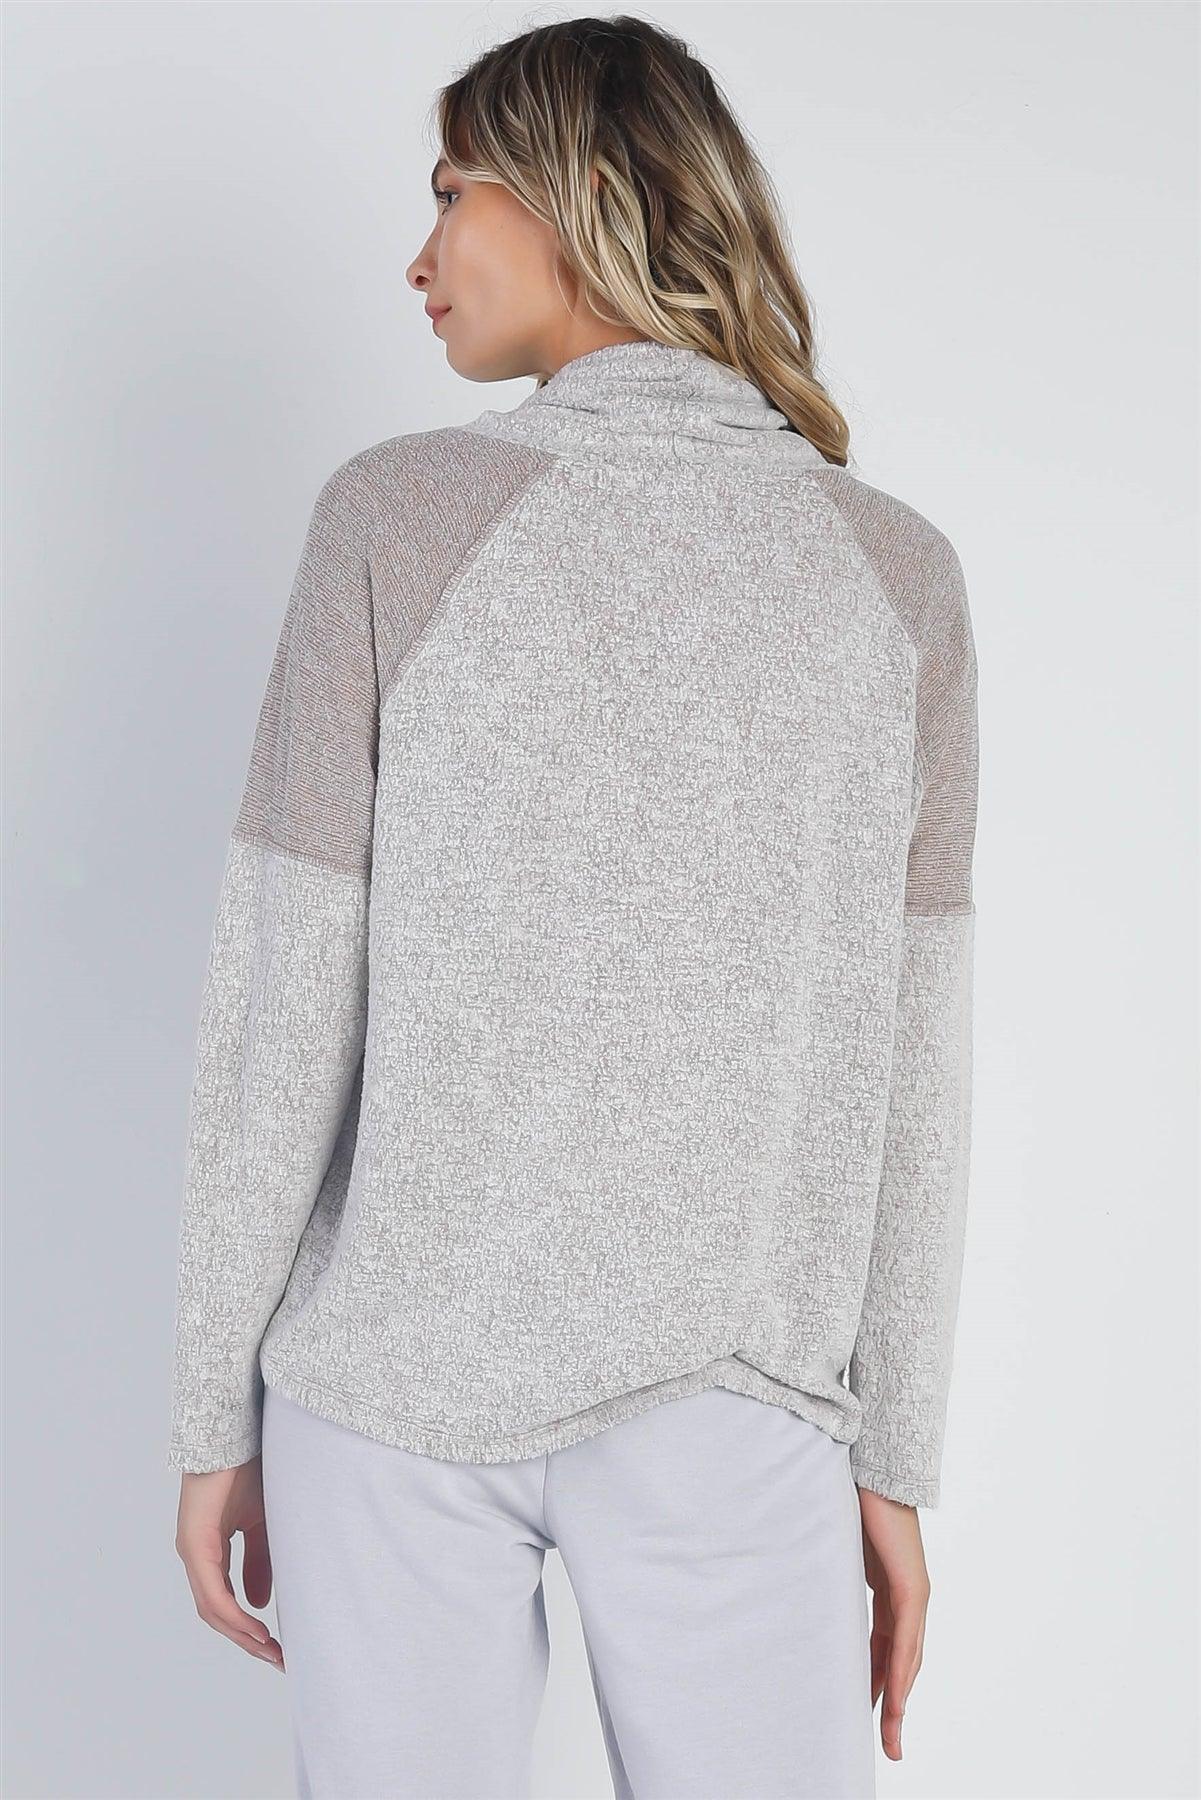 Taupe Textured Self-Tie Mock Neck Long Sleeve Sweater /1-1-1